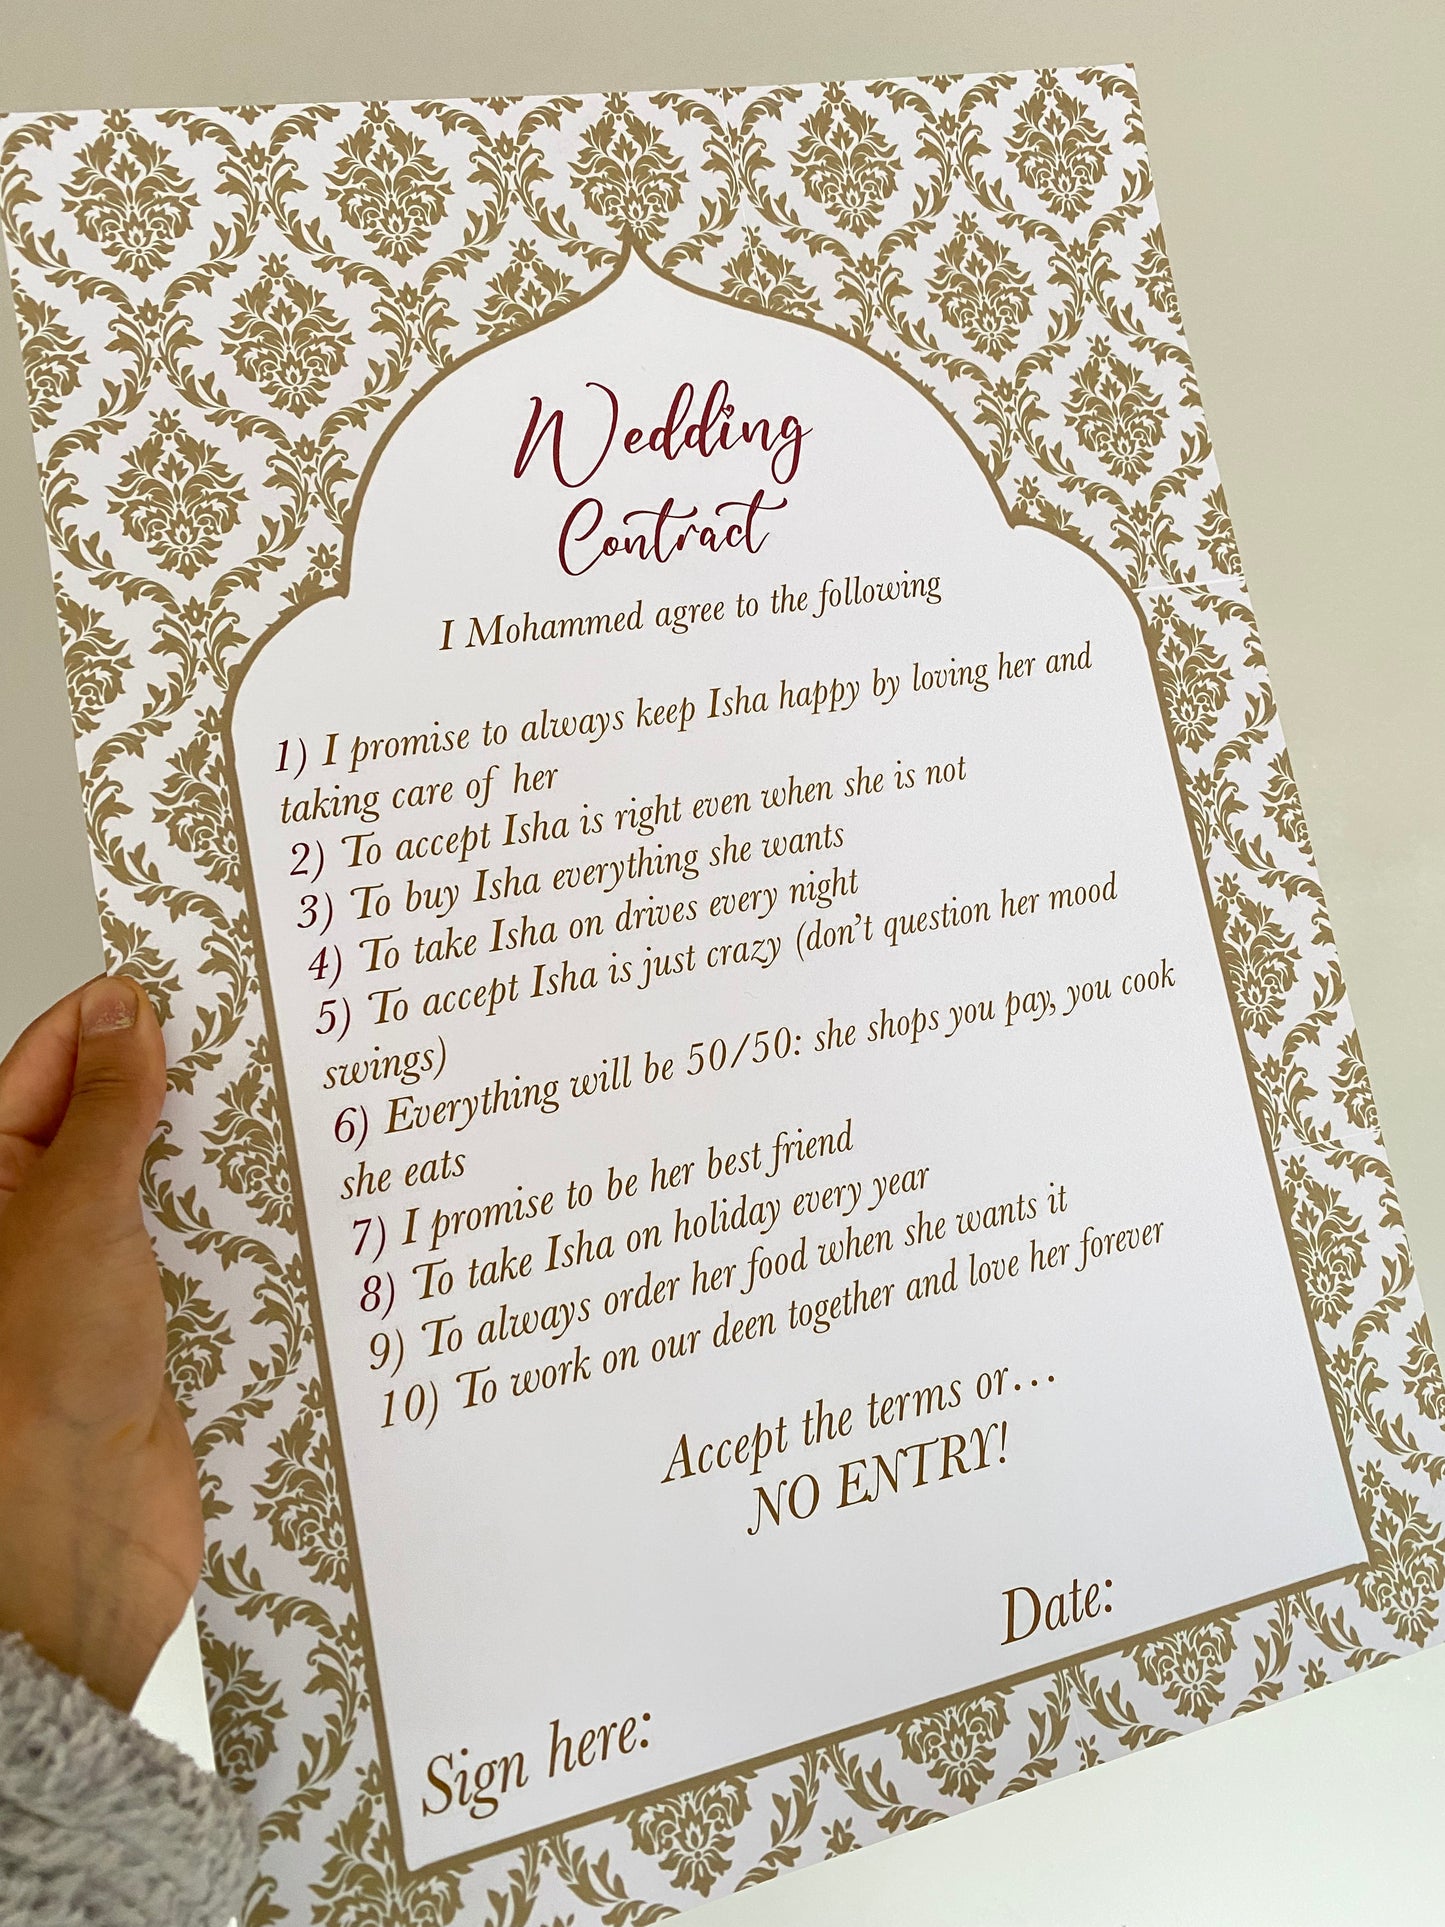 Bridal contract